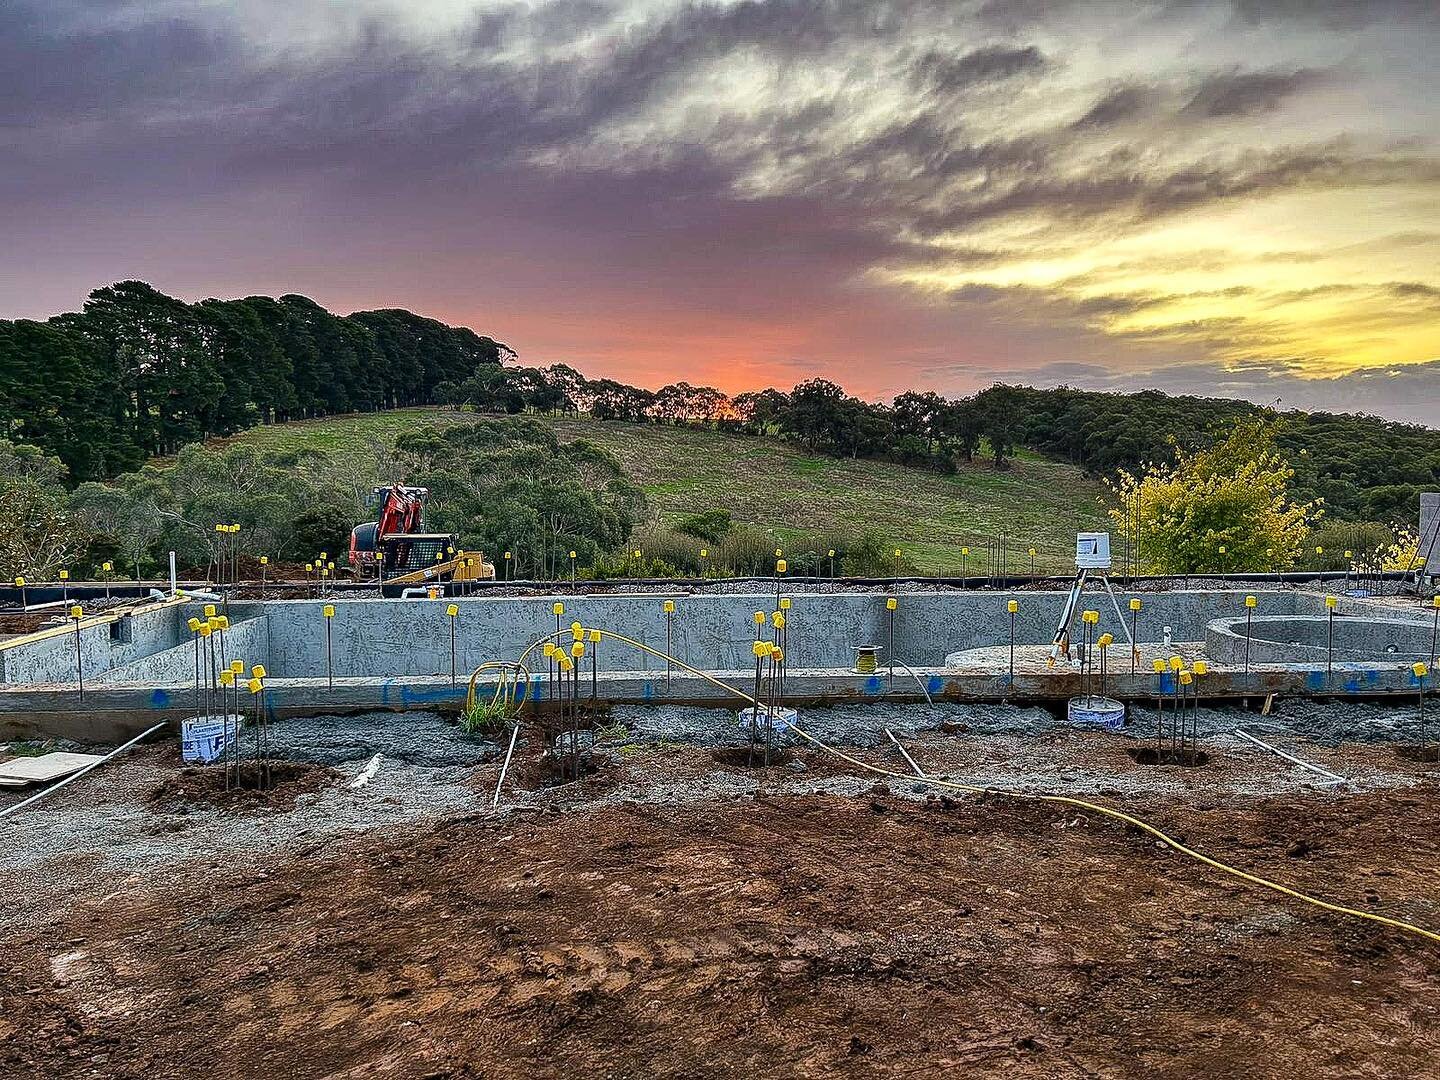 Our Red Hill project looks incredible already - just imagine when it&rsquo;s complete! 

The team are really enjoying being out in this scenic part of the world and the progress they&rsquo;re making on this impressive, large-scale pool and landscape 